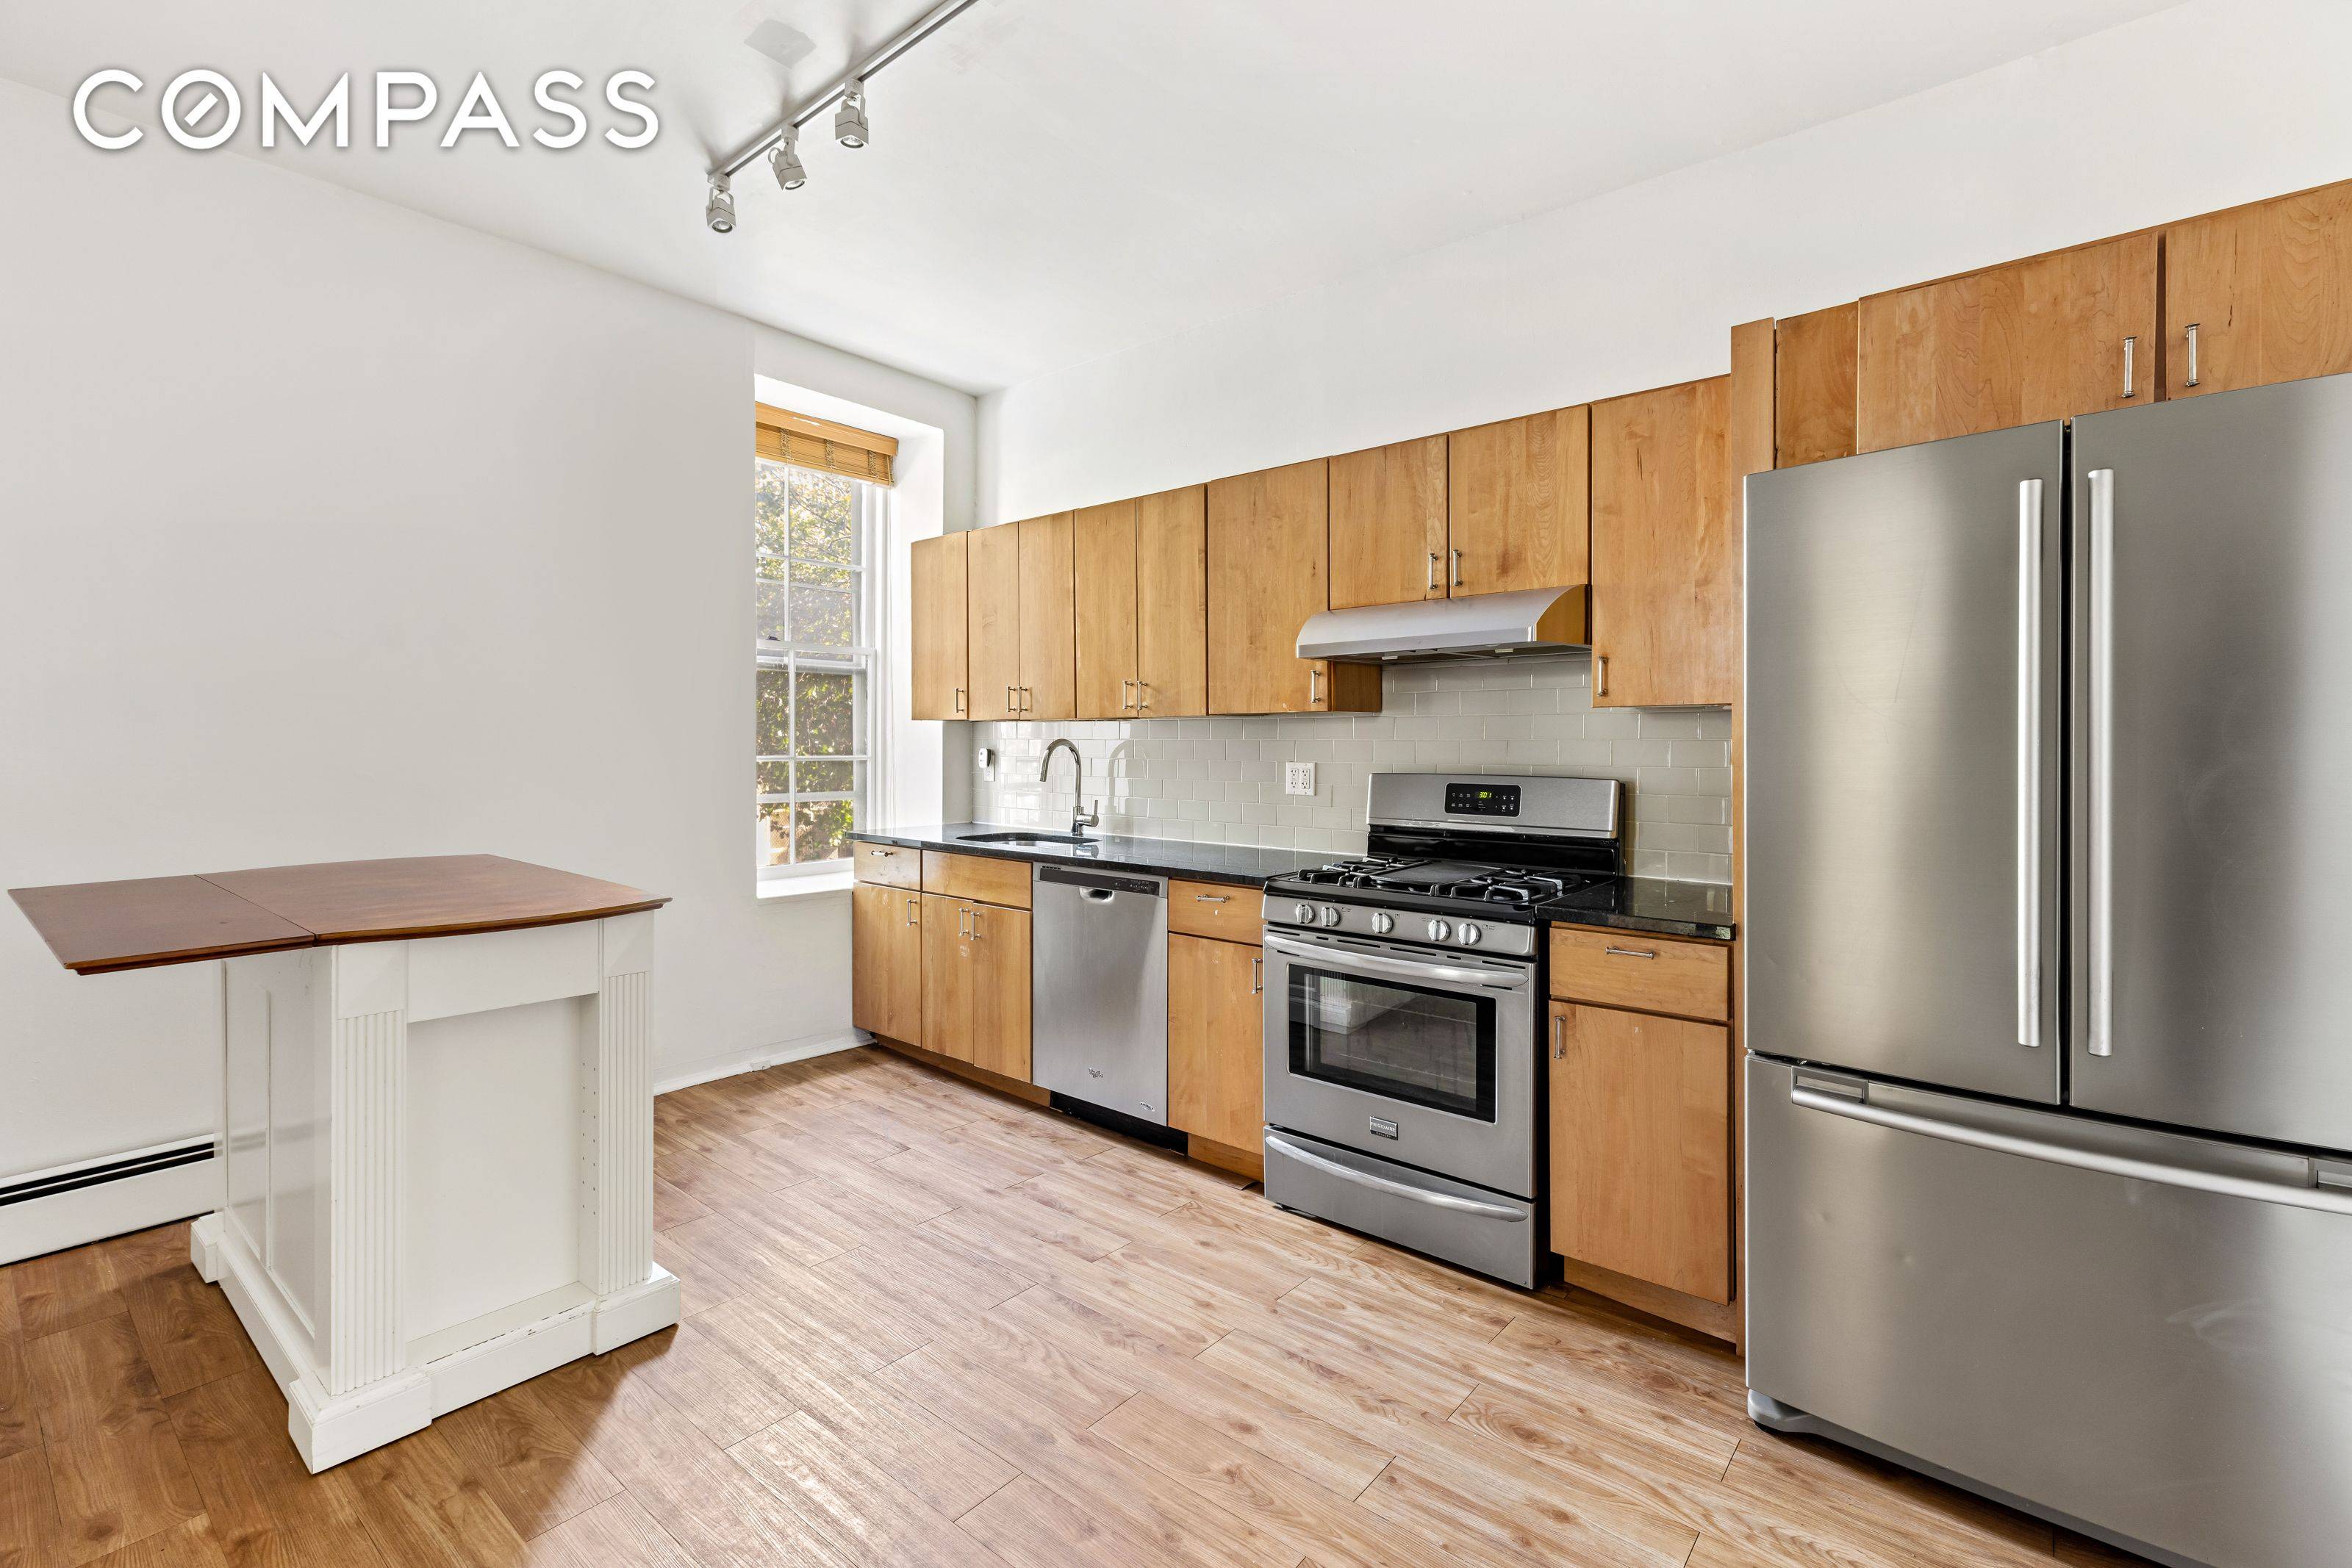 This expansive 2 BR, 2BA duplex is situated in a charming corner, 2 family townhouse on a tree lined block in prime Boerum Hill.